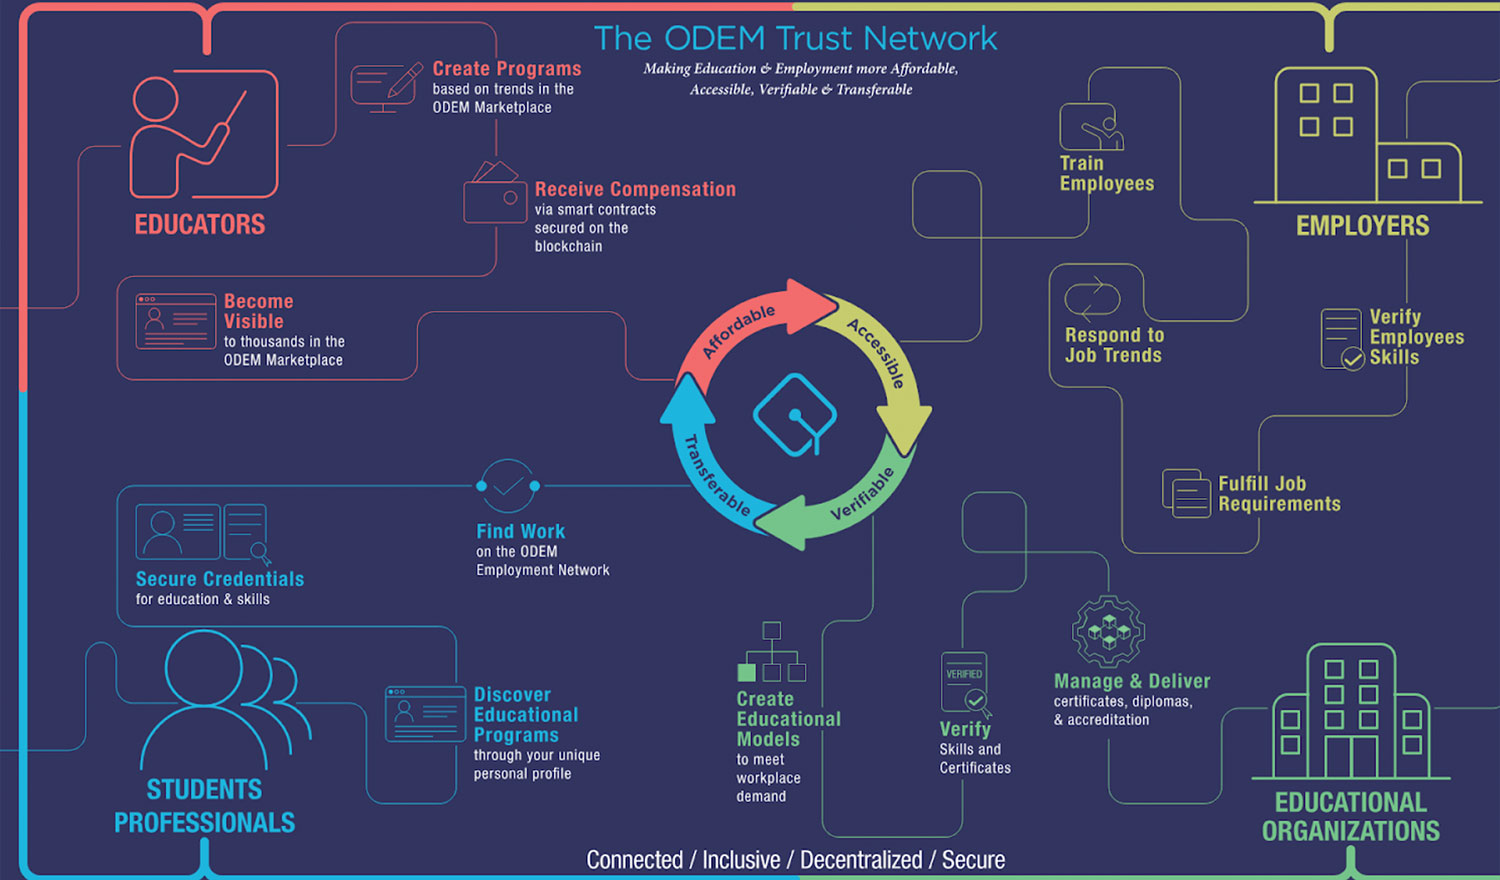 informational graphic illustrating the ODEM Trust Network